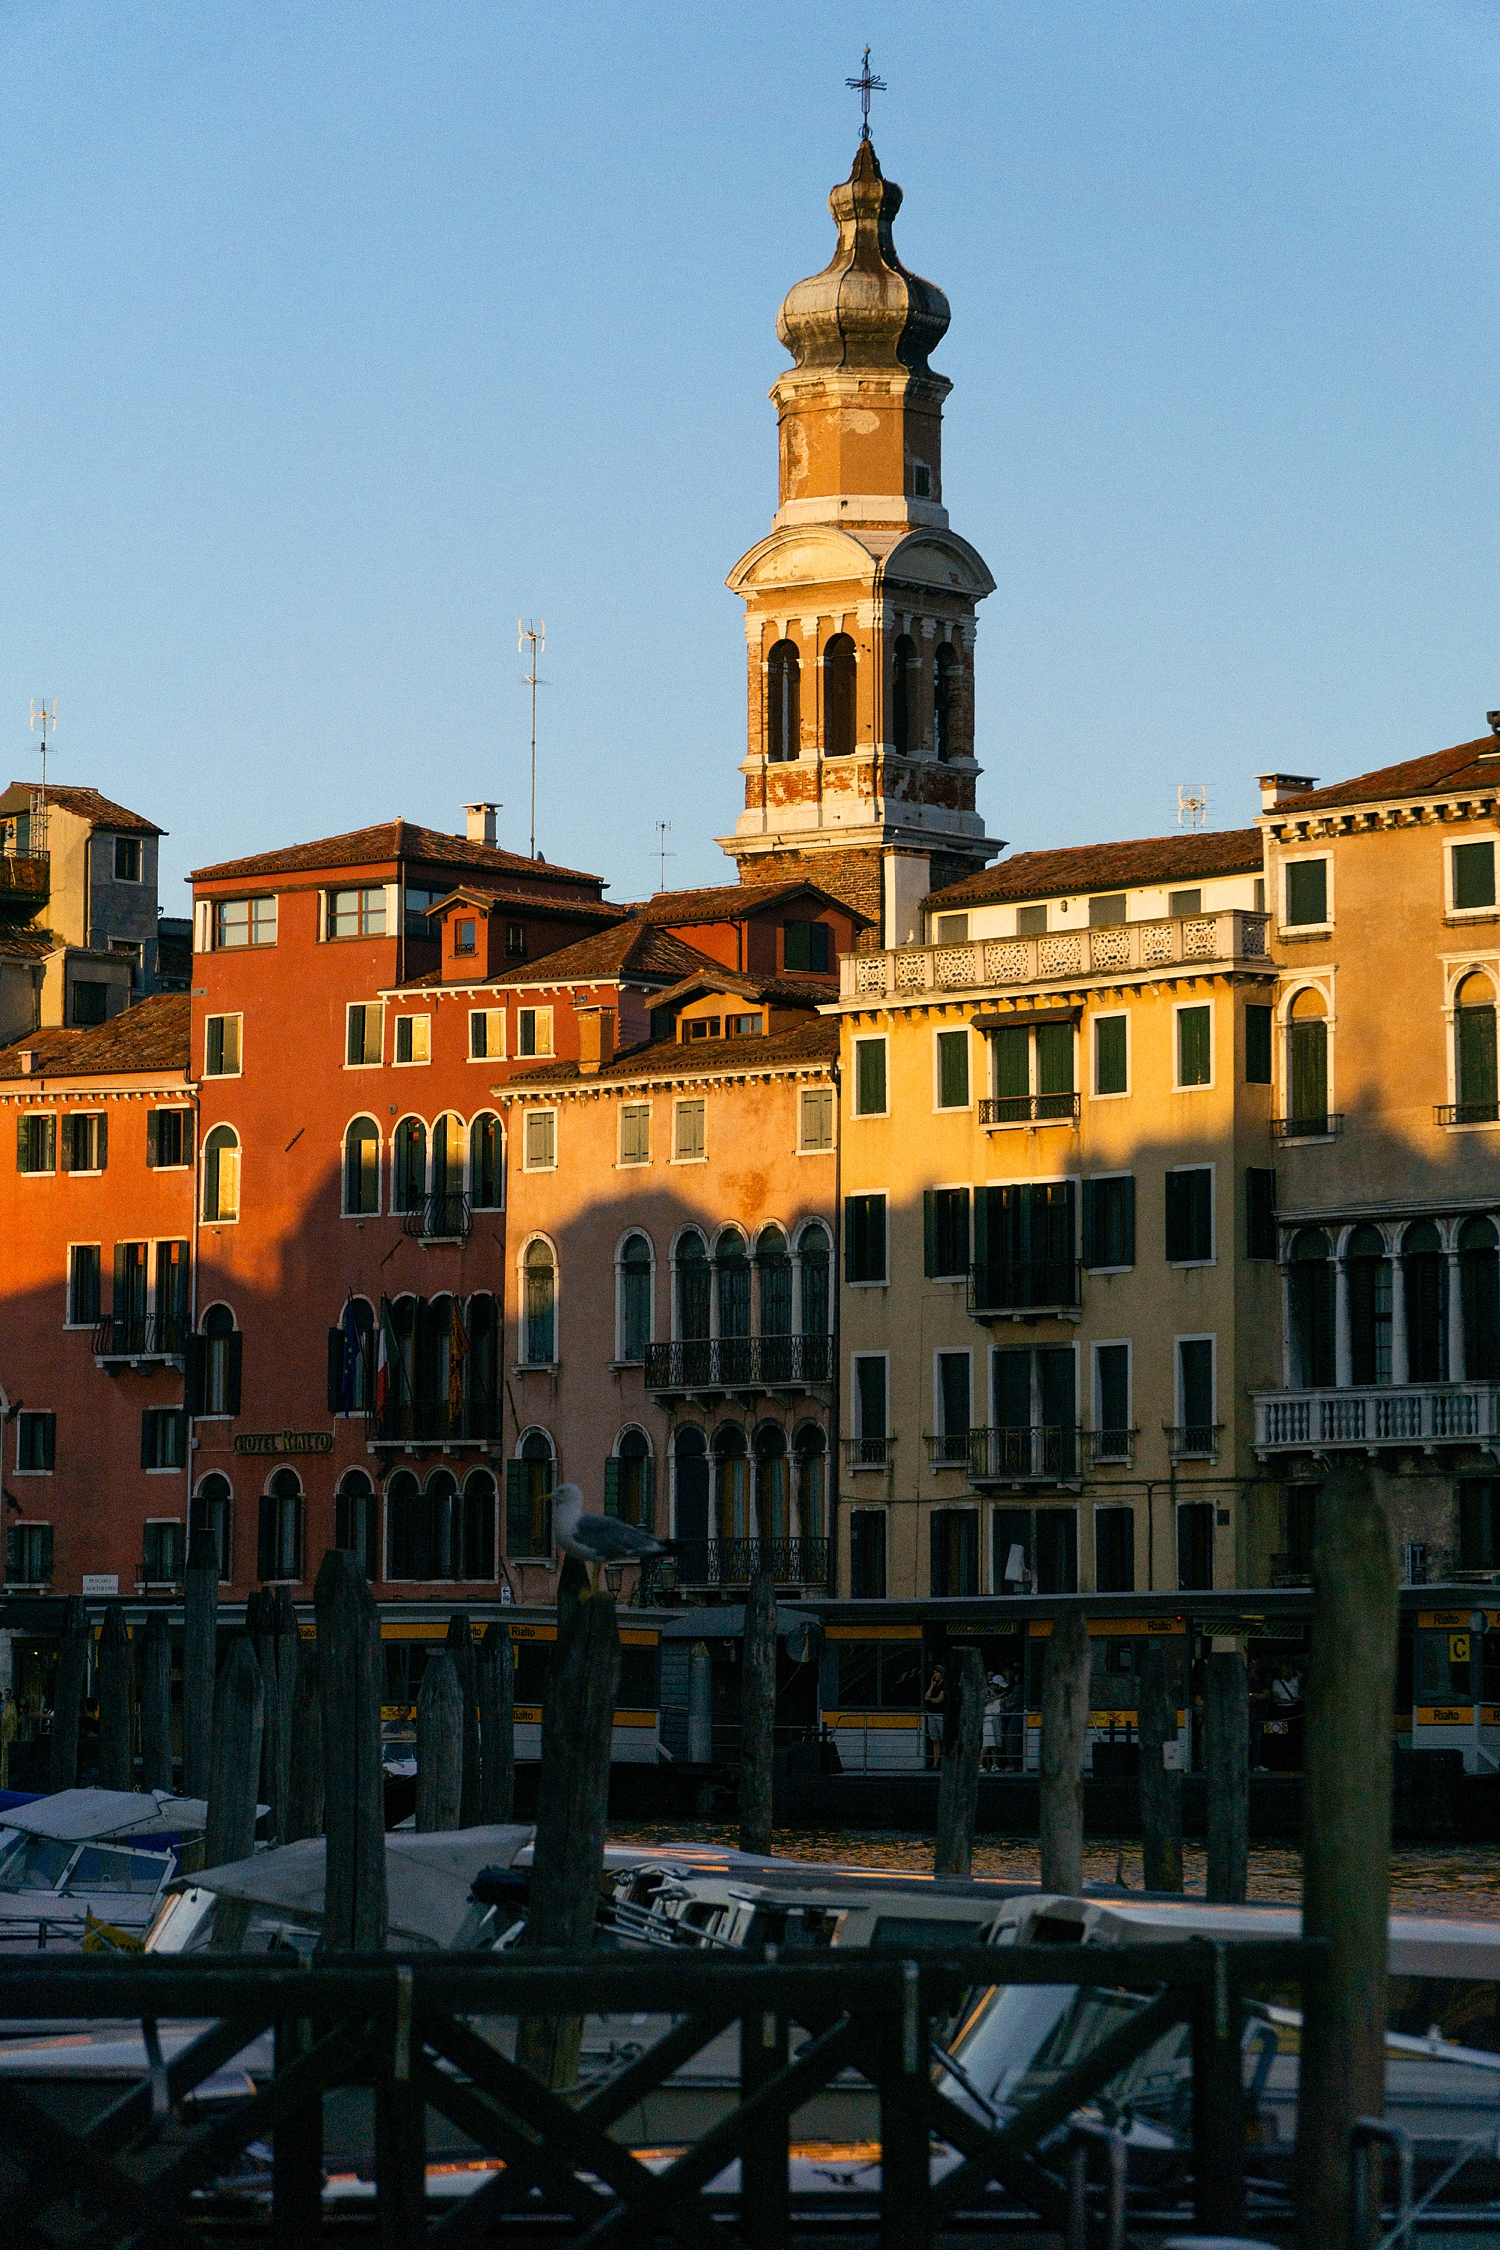 Grand Canal orange and yellow buildings with Chiesa Cattolica Parrocchiale dei Santi Apostoli Tower at sunset in Venice, Italy 